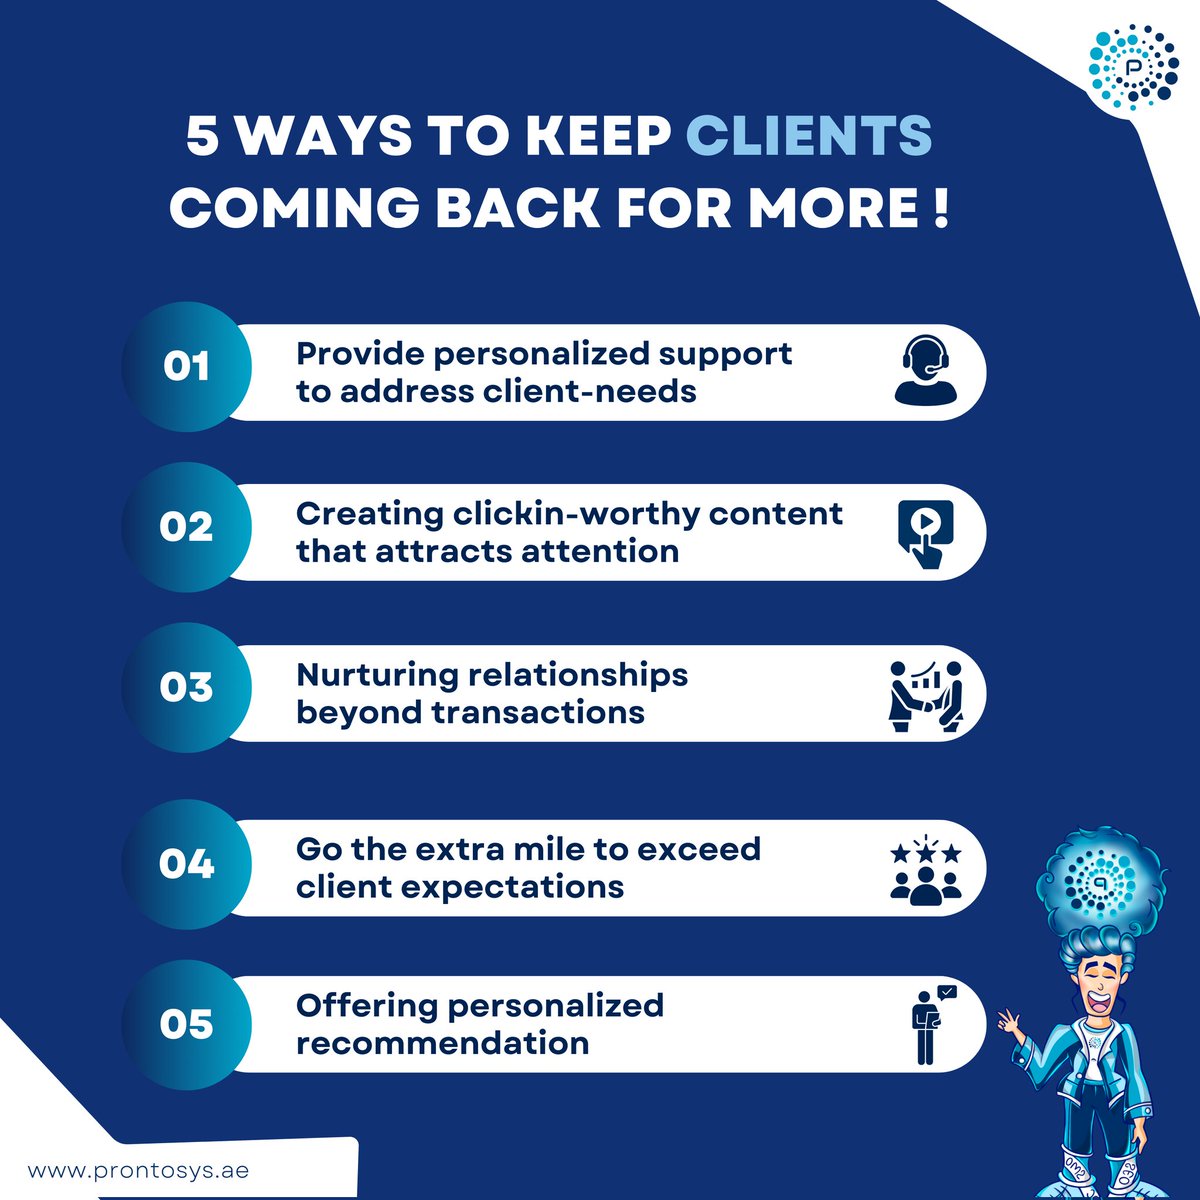 Know the Perfect Blend to Keep Clients Coming Back! Unveil the secret recipe with prontosys and elevate your client connections today

prontosys.ae
.
.
#prontosys #ClientRetention #CustomerRelationships #ClientEngagement #BusinessGrowth #ClientSatisfaction